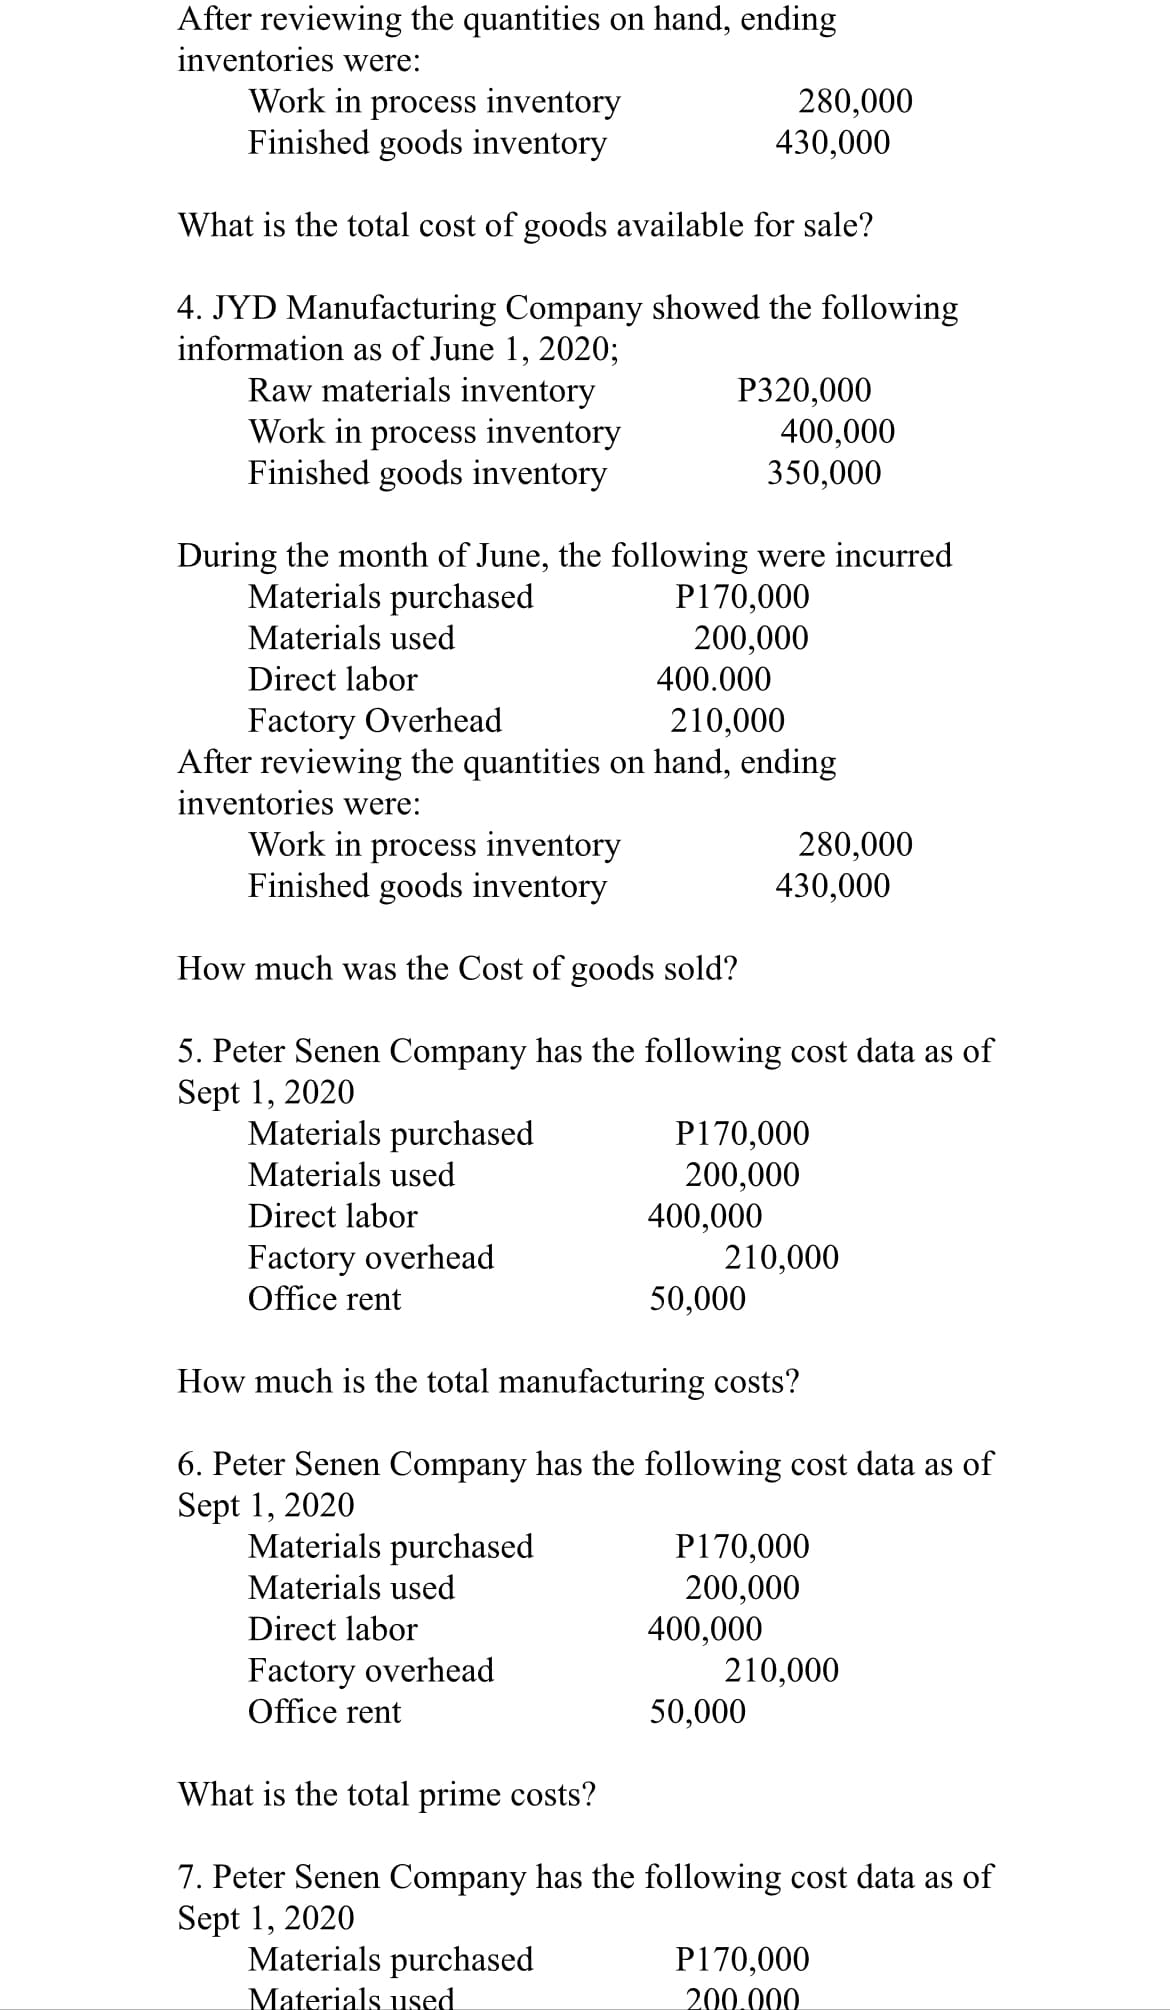 After reviewing the quantities on hand, ending
inventories were:
Work in process inventory
Finished goods inventory
280,000
430,000
What is the total cost of goods available for sale?
4. JYD Manufacturing Company showed the following
information as of June 1, 2020;
Raw materials inventory
Work in process inventory
Finished goods inventory
Р320,000
400,000
350,000
During the month of June, the following were incurred
Materials purchased
P170,000
200,000
Materials used
Direct labor
400.000
Factory Overhead
After reviewing the quantities on hand, ending
inventories were:
210,000
Work in process inventory
Finished goods inventory
280,000
430,000
How much was the Cost of goods sold?
5. Peter Senen Company has the following cost data as of
Sept 1, 2020
Materials purchased
P170,000
200,000
400,000
210,000
50,000
Materials used
Direct labor
Factory overhead
Office rent
How much is the total manufacturing costs?
6. Peter Senen Company has the following cost data as of
Sept 1, 2020
Materials purchased
Materials used
P170,000
200,000
400,000
210,000
50,000
Direct labor
Factory overhead
Office rent
What is the total prime costs?
7. Peter Senen Company has the following cost data as of
Sept 1, 2020
Materials purchased
P170,000
200.000
Materials used
